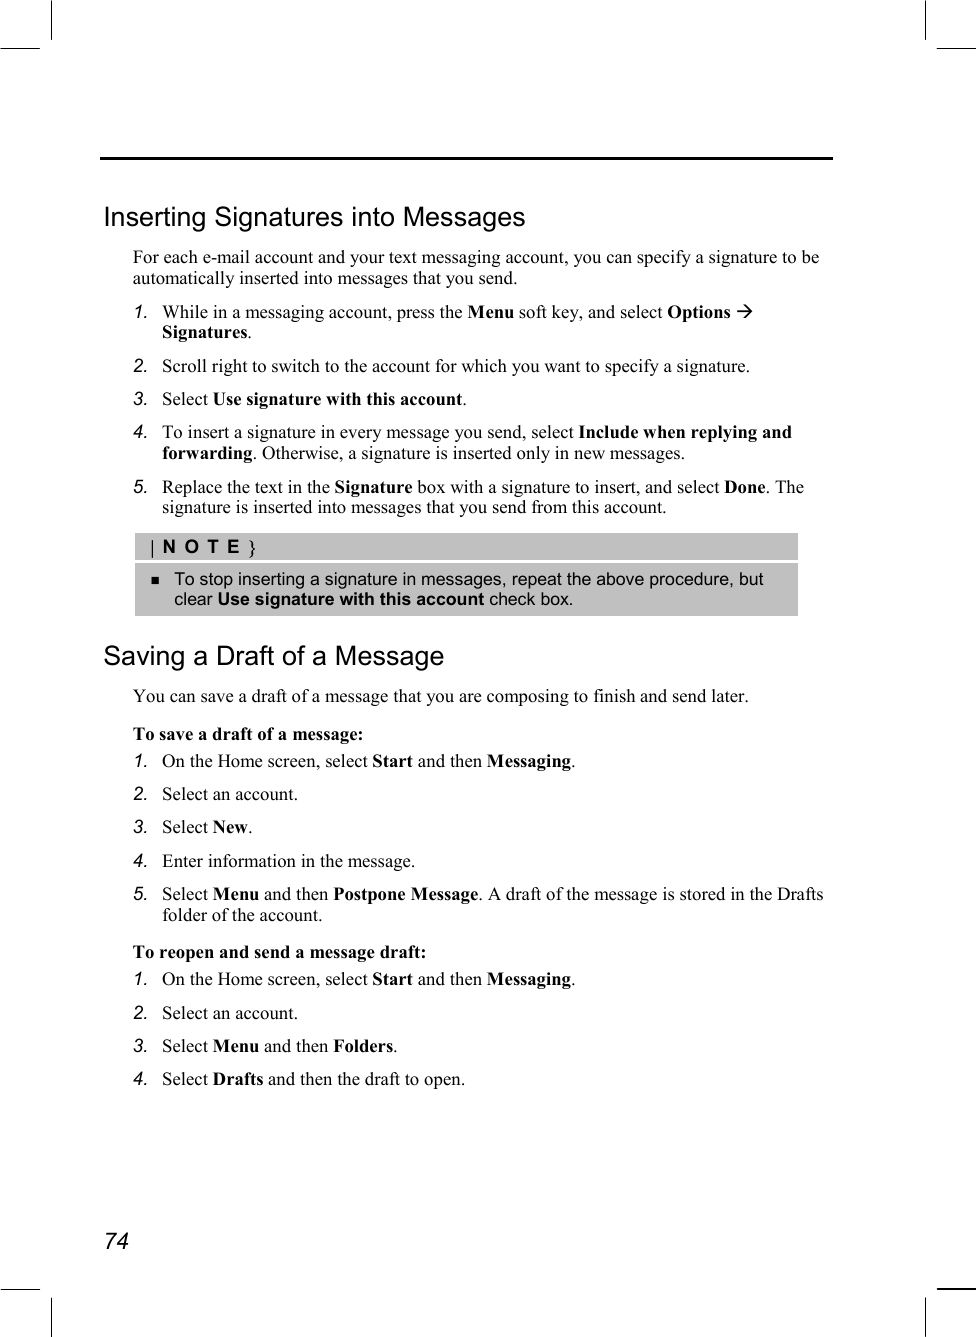  74  Inserting Signatures into Messages For each e-mail account and your text messaging account, you can specify a signature to be automatically inserted into messages that you send. 1.  While in a messaging account, press the Menu soft key, and select Options  Signatures. 2.  Scroll right to switch to the account for which you want to specify a signature. 3.  Select Use signature with this account. 4.  To insert a signature in every message you send, select Include when replying and forwarding. Otherwise, a signature is inserted only in new messages. 5.  Replace the text in the Signature box with a signature to insert, and select Done. The signature is inserted into messages that you send from this account. |NOTE}   To stop inserting a signature in messages, repeat the above procedure, but clear Use signature with this account check box. Saving a Draft of a Message You can save a draft of a message that you are composing to finish and send later. To save a draft of a message: 1.  On the Home screen, select Start and then Messaging. 2.  Select an account. 3.  Select New. 4.  Enter information in the message. 5.  Select Menu and then Postpone Message. A draft of the message is stored in the Drafts folder of the account. To reopen and send a message draft: 1.  On the Home screen, select Start and then Messaging. 2.  Select an account. 3.  Select Menu and then Folders. 4.  Select Drafts and then the draft to open. 